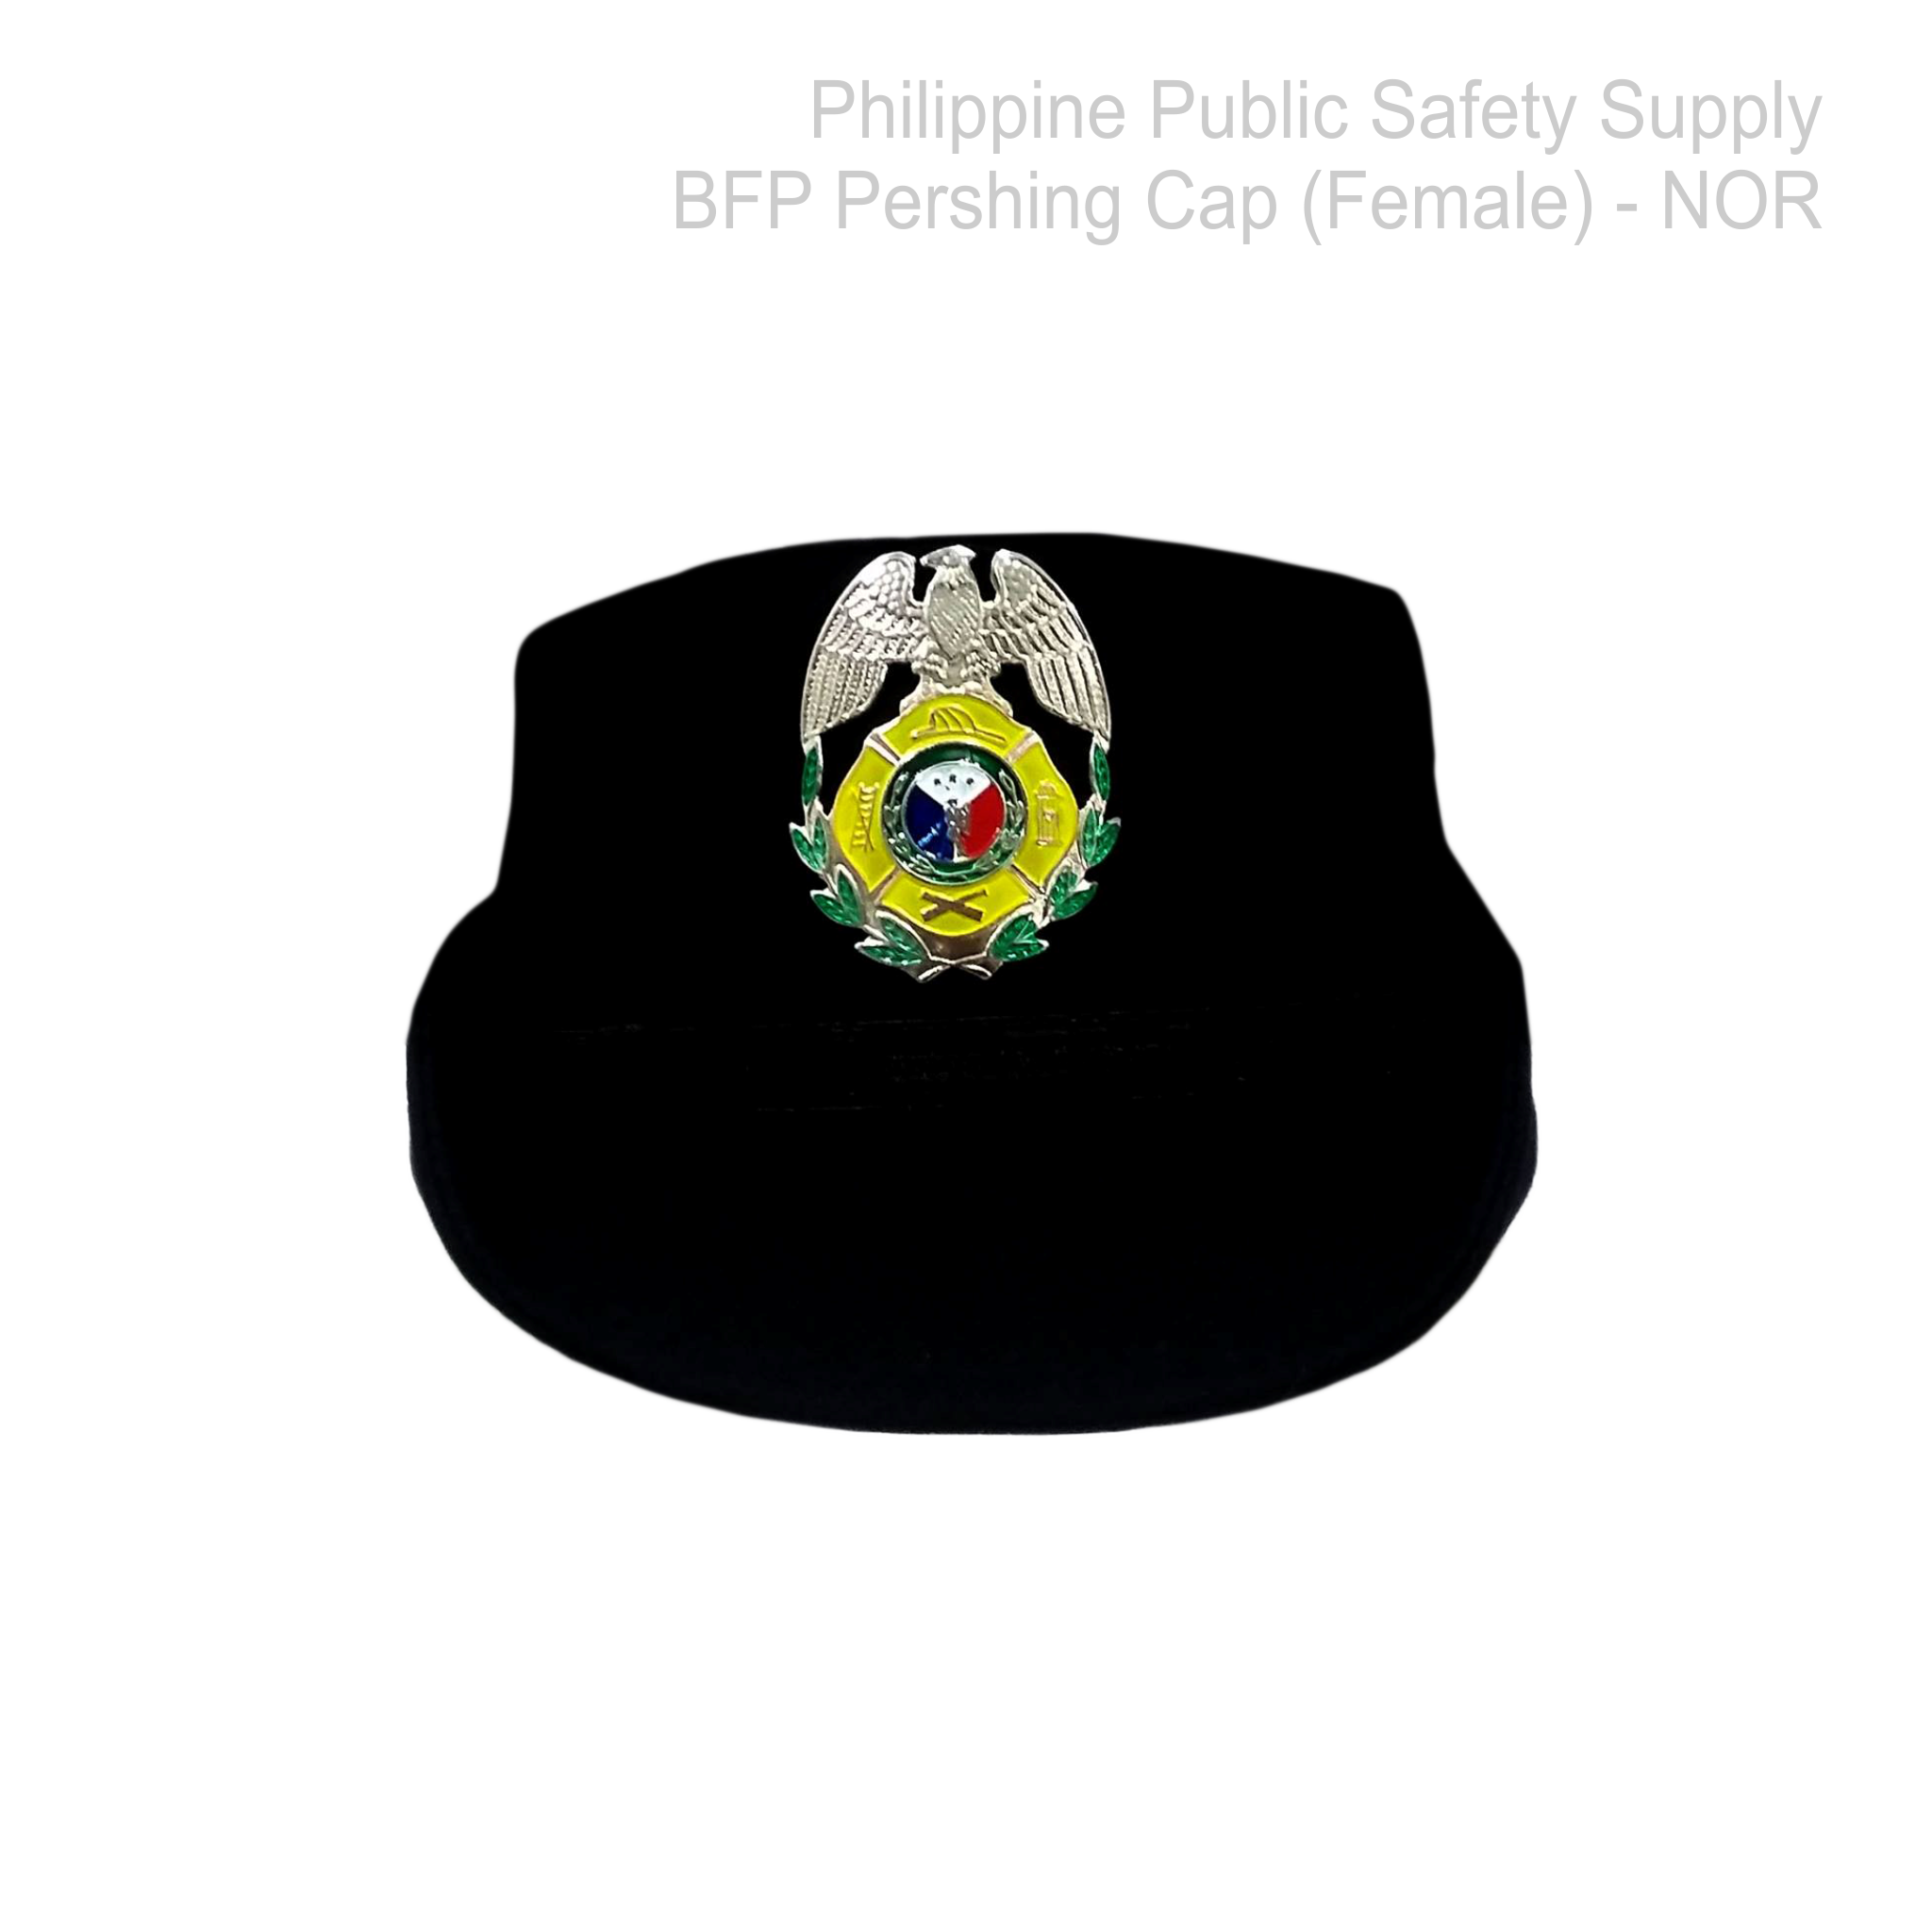 Bureau of Fire Protection (BFP) Pershing Cap (Female) NOR - BFP